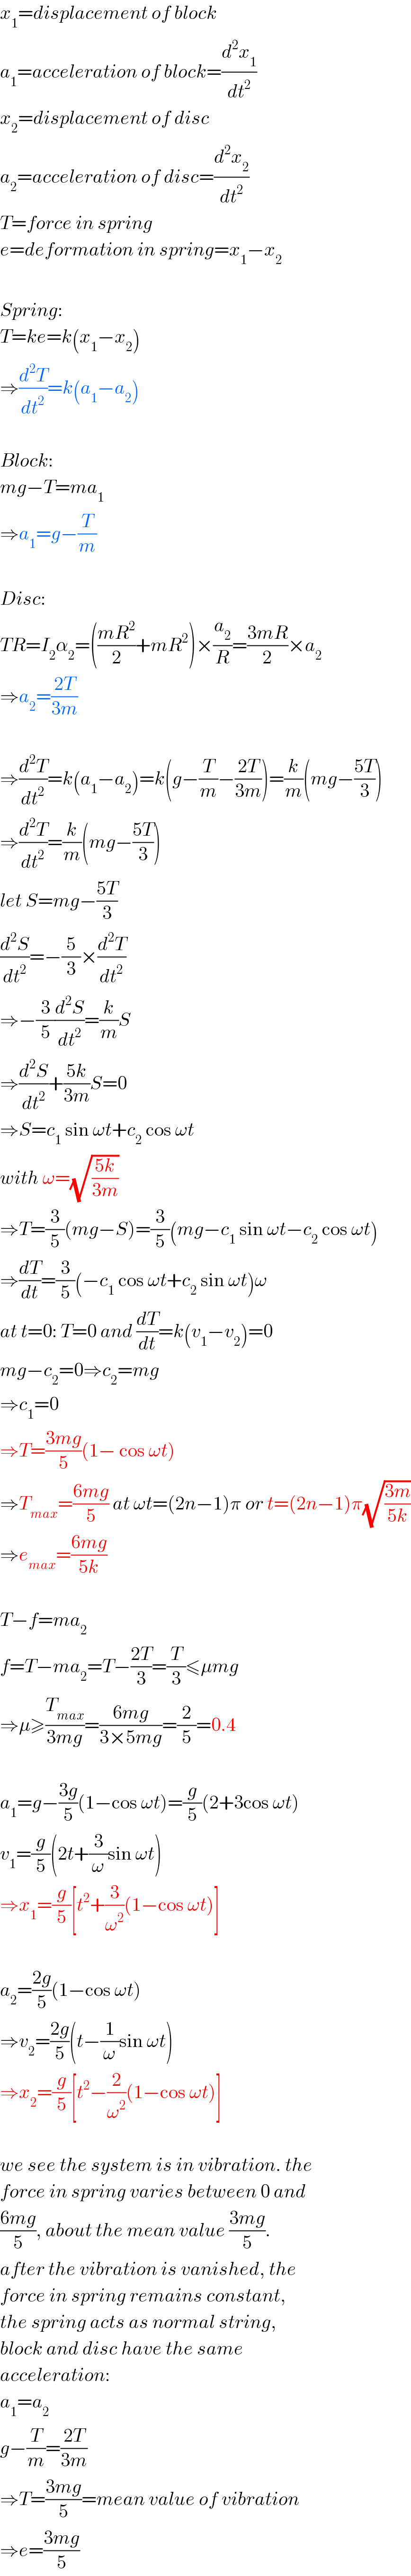 x_1 =displacement of block  a_1 =acceleration of block=(d^2 x_1 /dt^2 )  x_2 =displacement of disc  a_2 =acceleration of disc=(d^2 x_2 /dt^2 )  T=force in spring  e=deformation in spring=x_1 −x_2     Spring:  T=ke=k(x_1 −x_2 )  ⇒(d^2 T/dt^2 )=k(a_1 −a_2 )    Block:  mg−T=ma_1   ⇒a_1 =g−(T/m)    Disc:  TR=I_2 α_2 =(((mR^2 )/2)+mR^2 )×(a_2 /R)=((3mR)/2)×a_2   ⇒a_2 =((2T)/(3m))    ⇒(d^2 T/dt^2 )=k(a_1 −a_2 )=k(g−(T/m)−((2T)/(3m)))=(k/m)(mg−((5T)/3))  ⇒(d^2 T/dt^2 )=(k/m)(mg−((5T)/3))  let S=mg−((5T)/3)  (d^2 S/dt^2 )=−(5/3)×(d^2 T/dt^2 )  ⇒−(3/5)(d^2 S/dt^2 )=(k/m)S  ⇒(d^2 S/dt^2 )+((5k)/(3m))S=0  ⇒S=c_1  sin ωt+c_2  cos ωt  with ω=(√((5k)/(3m)))  ⇒T=(3/5)(mg−S)=(3/5)(mg−c_1  sin ωt−c_2  cos ωt)  ⇒(dT/dt)=(3/5)(−c_1  cos ωt+c_2  sin ωt)ω  at t=0: T=0 and (dT/dt)=k(v_1 −v_2 )=0  mg−c_2 =0⇒c_2 =mg  ⇒c_1 =0  ⇒T=((3mg)/5)(1− cos ωt)  ⇒T_(max) =((6mg)/5) at ωt=(2n−1)π or t=(2n−1)π(√((3m)/(5k)))  ⇒e_(max) =((6mg)/(5k))    T−f=ma_2   f=T−ma_2 =T−((2T)/3)=(T/3)≤μmg  ⇒μ≥(T_(max) /(3mg))=((6mg)/(3×5mg))=(2/5)=0.4    a_1 =g−((3g)/5)(1−cos ωt)=(g/5)(2+3cos ωt)  v_1 =(g/5)(2t+(3/ω)sin ωt)  ⇒x_1 =(g/5)[t^2 +(3/ω^2 )(1−cos ωt)]    a_2 =((2g)/5)(1−cos ωt)  ⇒v_2 =((2g)/5)(t−(1/ω)sin ωt)  ⇒x_2 =(g/5)[t^2 −(2/ω^2 )(1−cos ωt)]    we see the system is in vibration. the  force in spring varies between 0 and  ((6mg)/5), about the mean value ((3mg)/5).  after the vibration is vanished, the  force in spring remains constant,  the spring acts as normal string,  block and disc have the same  acceleration:  a_1 =a_2   g−(T/m)=((2T)/(3m))  ⇒T=((3mg)/5)=mean value of vibration  ⇒e=((3mg)/5)  